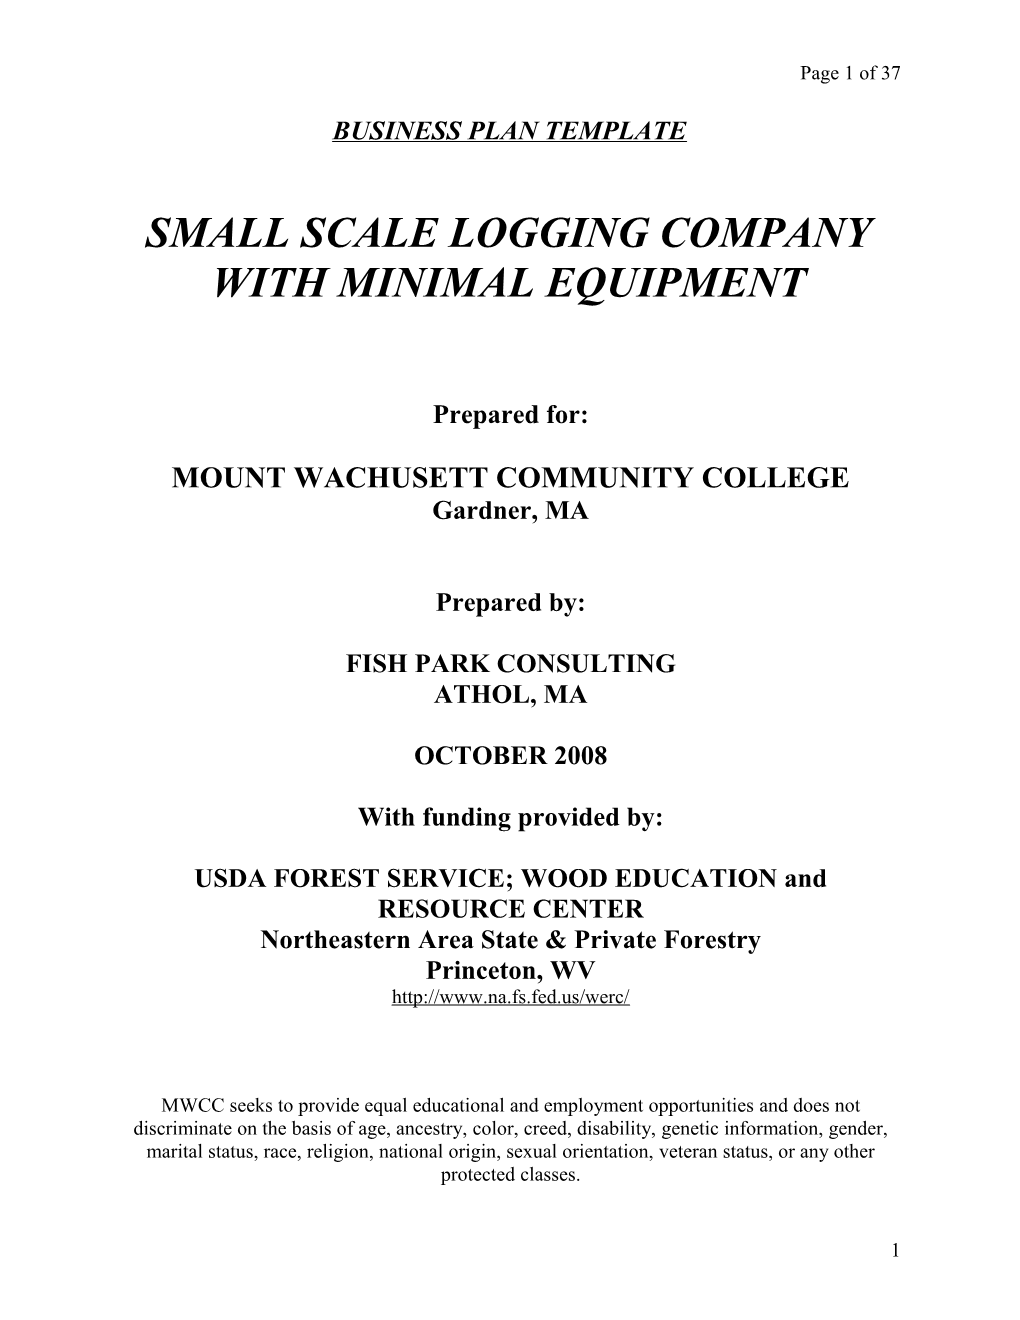 Small Scale Logging Company with Minimal Equipment